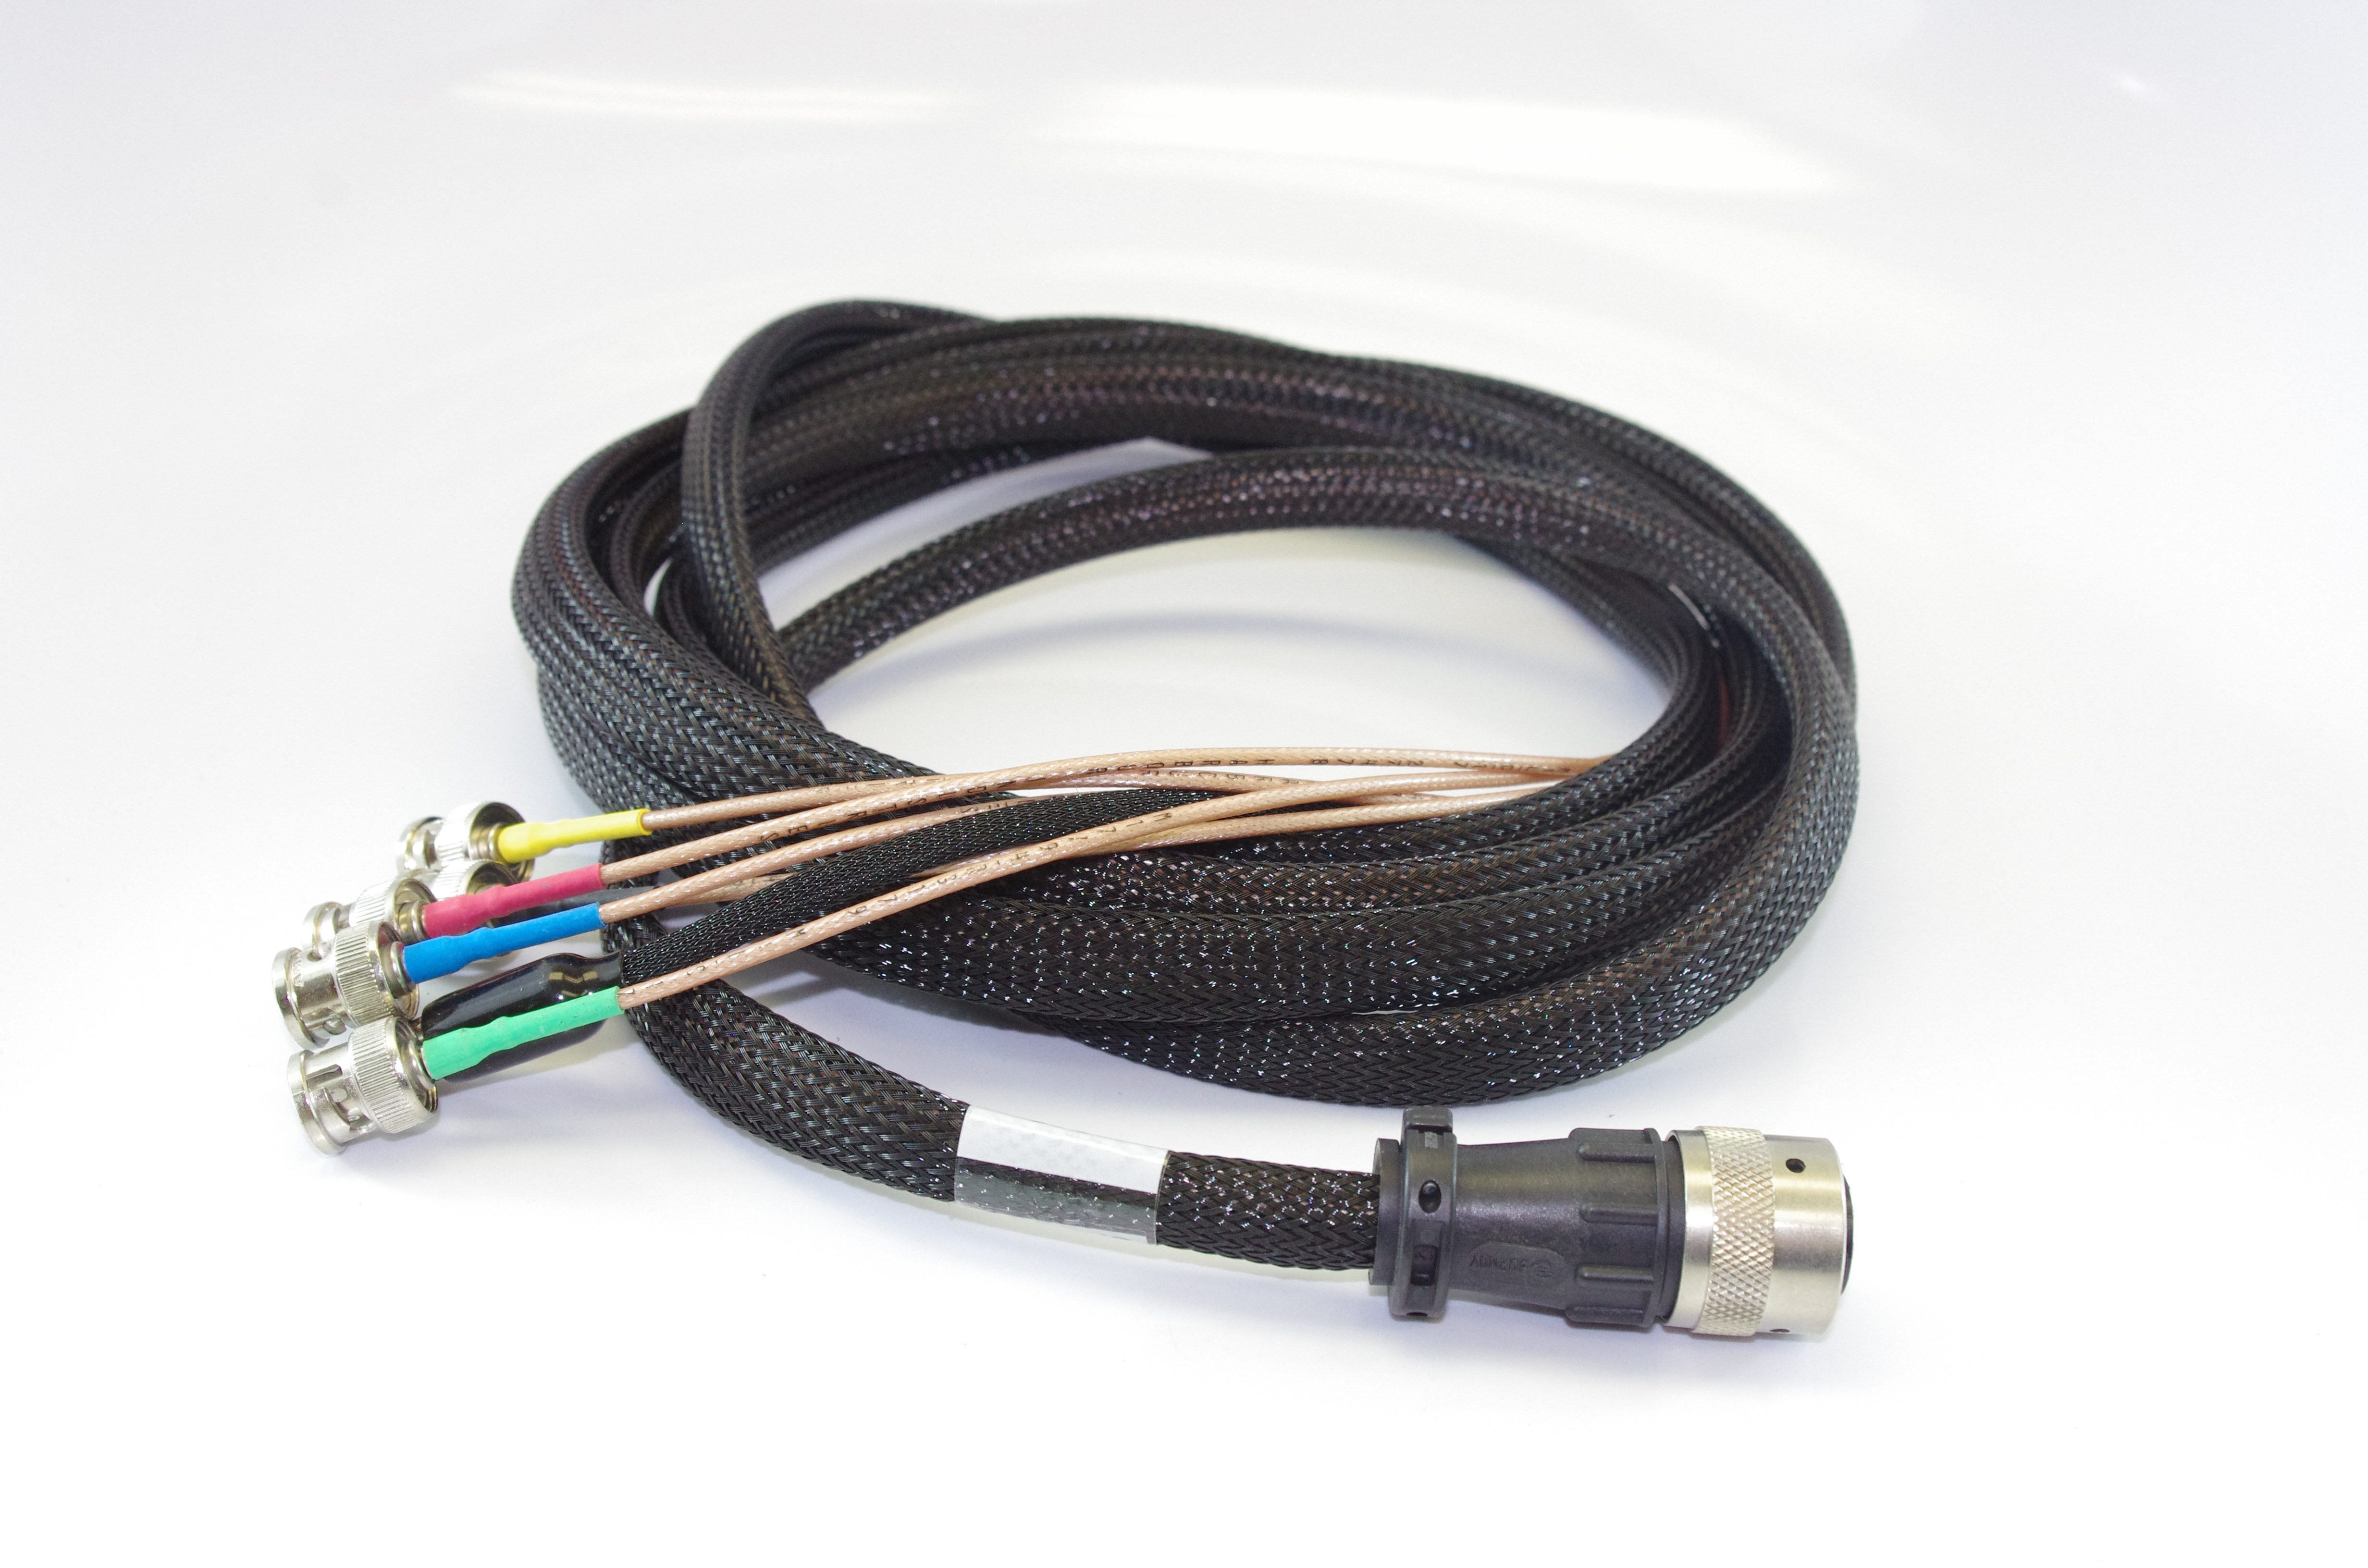 Olympus Video Monitor Cable - 55583L12 (12 ft.)